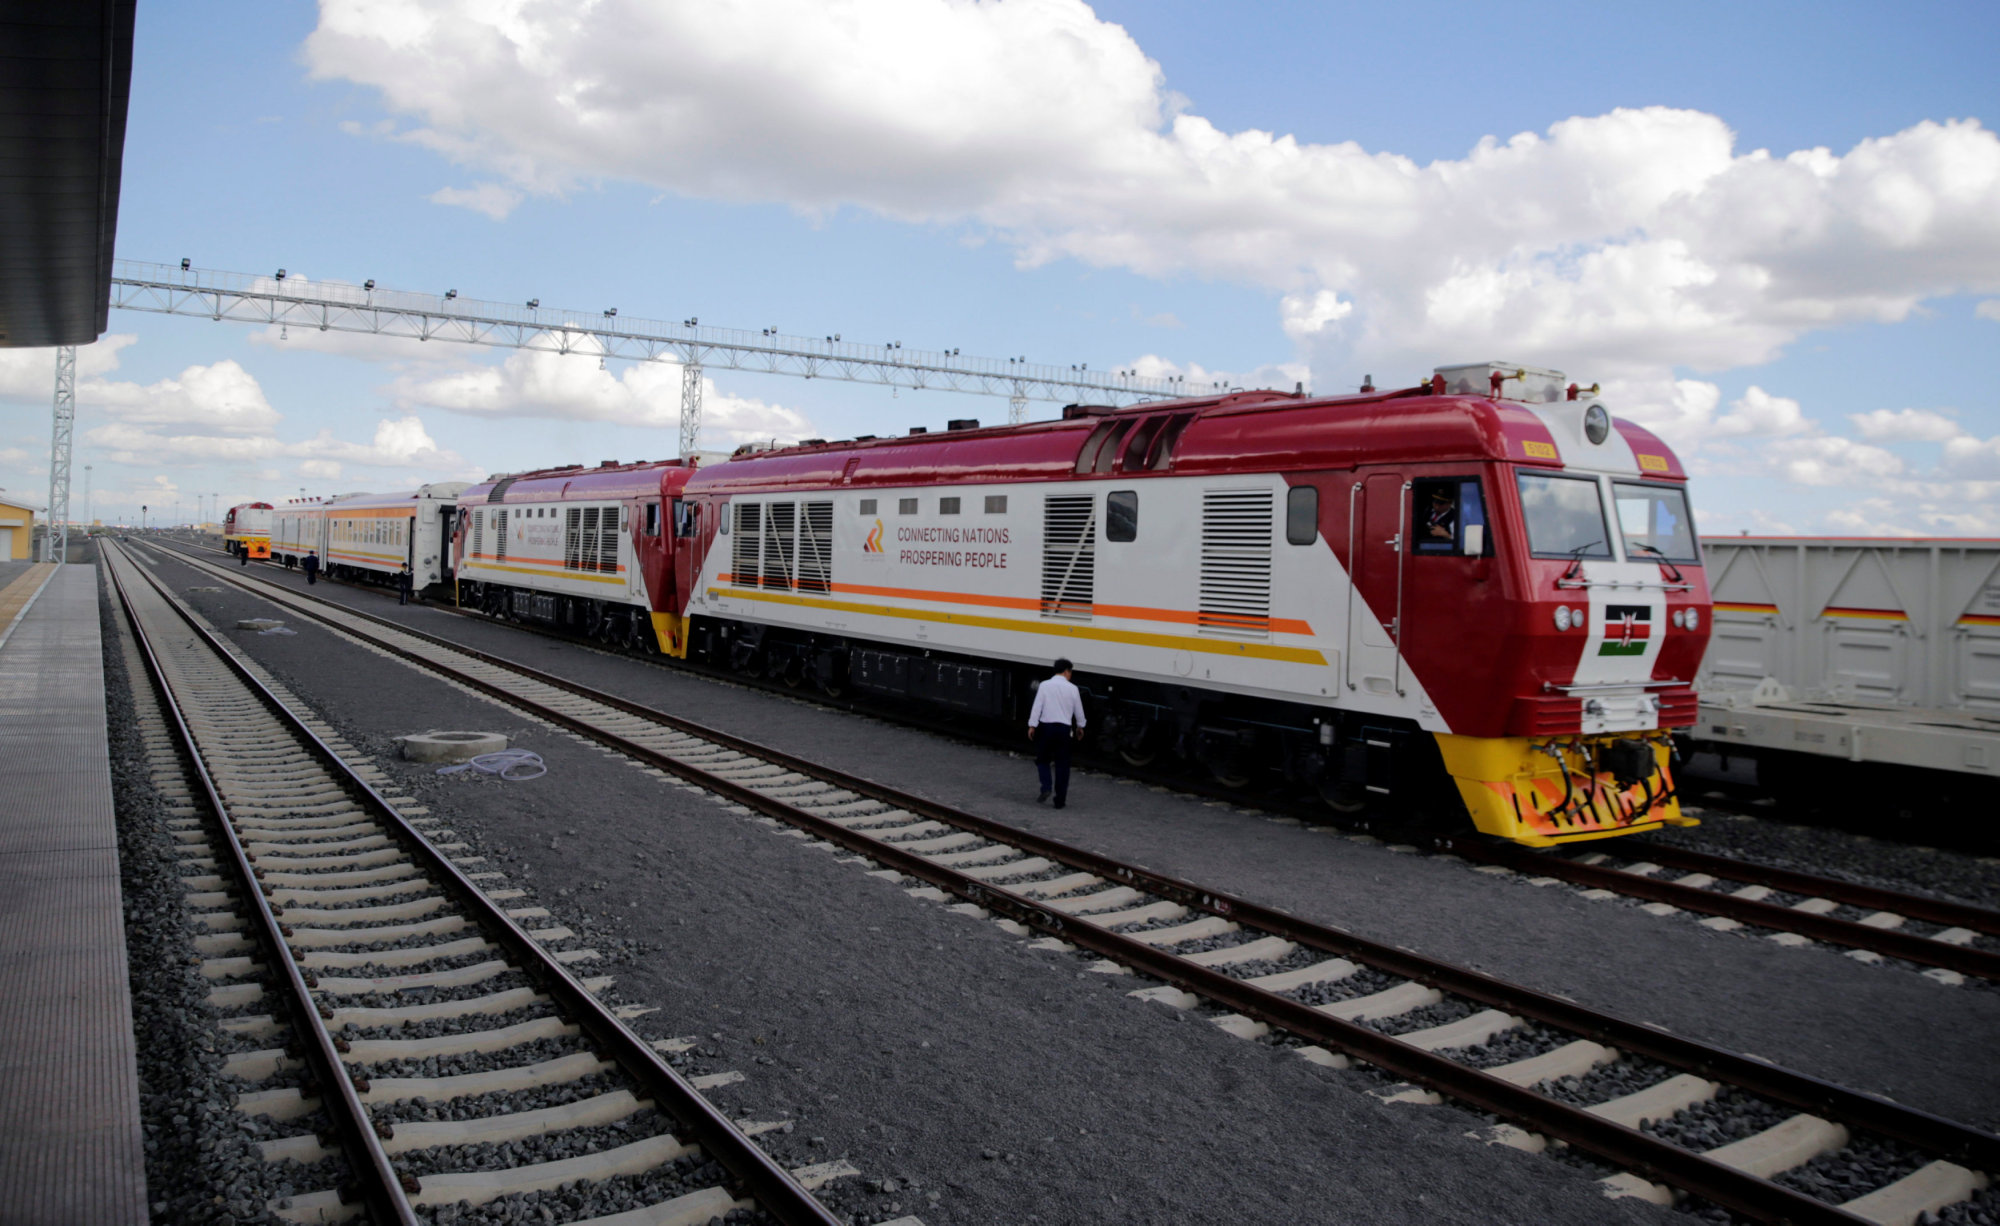 A train launched to operate on the Standard Gauge Railway (SGR) line constructed by the China Road and Bridge Corporation (CRBC) and financed by the Chinese government arrives at the Nairobi Terminus on the outskirts of Kenya's capital Wednesday. | REUTERS